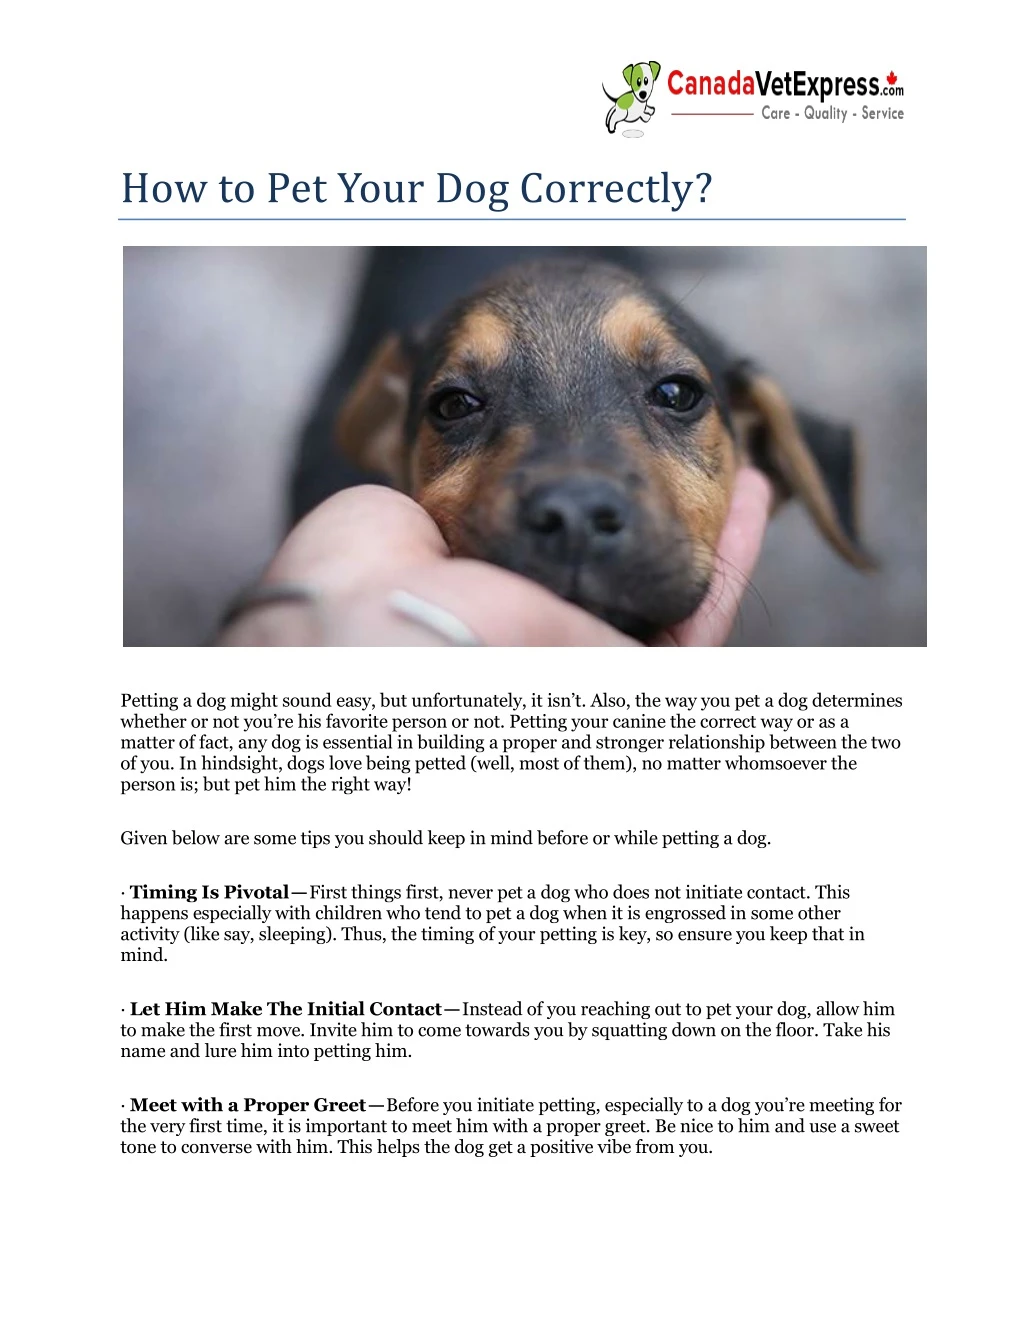 how to pet your dog correctly